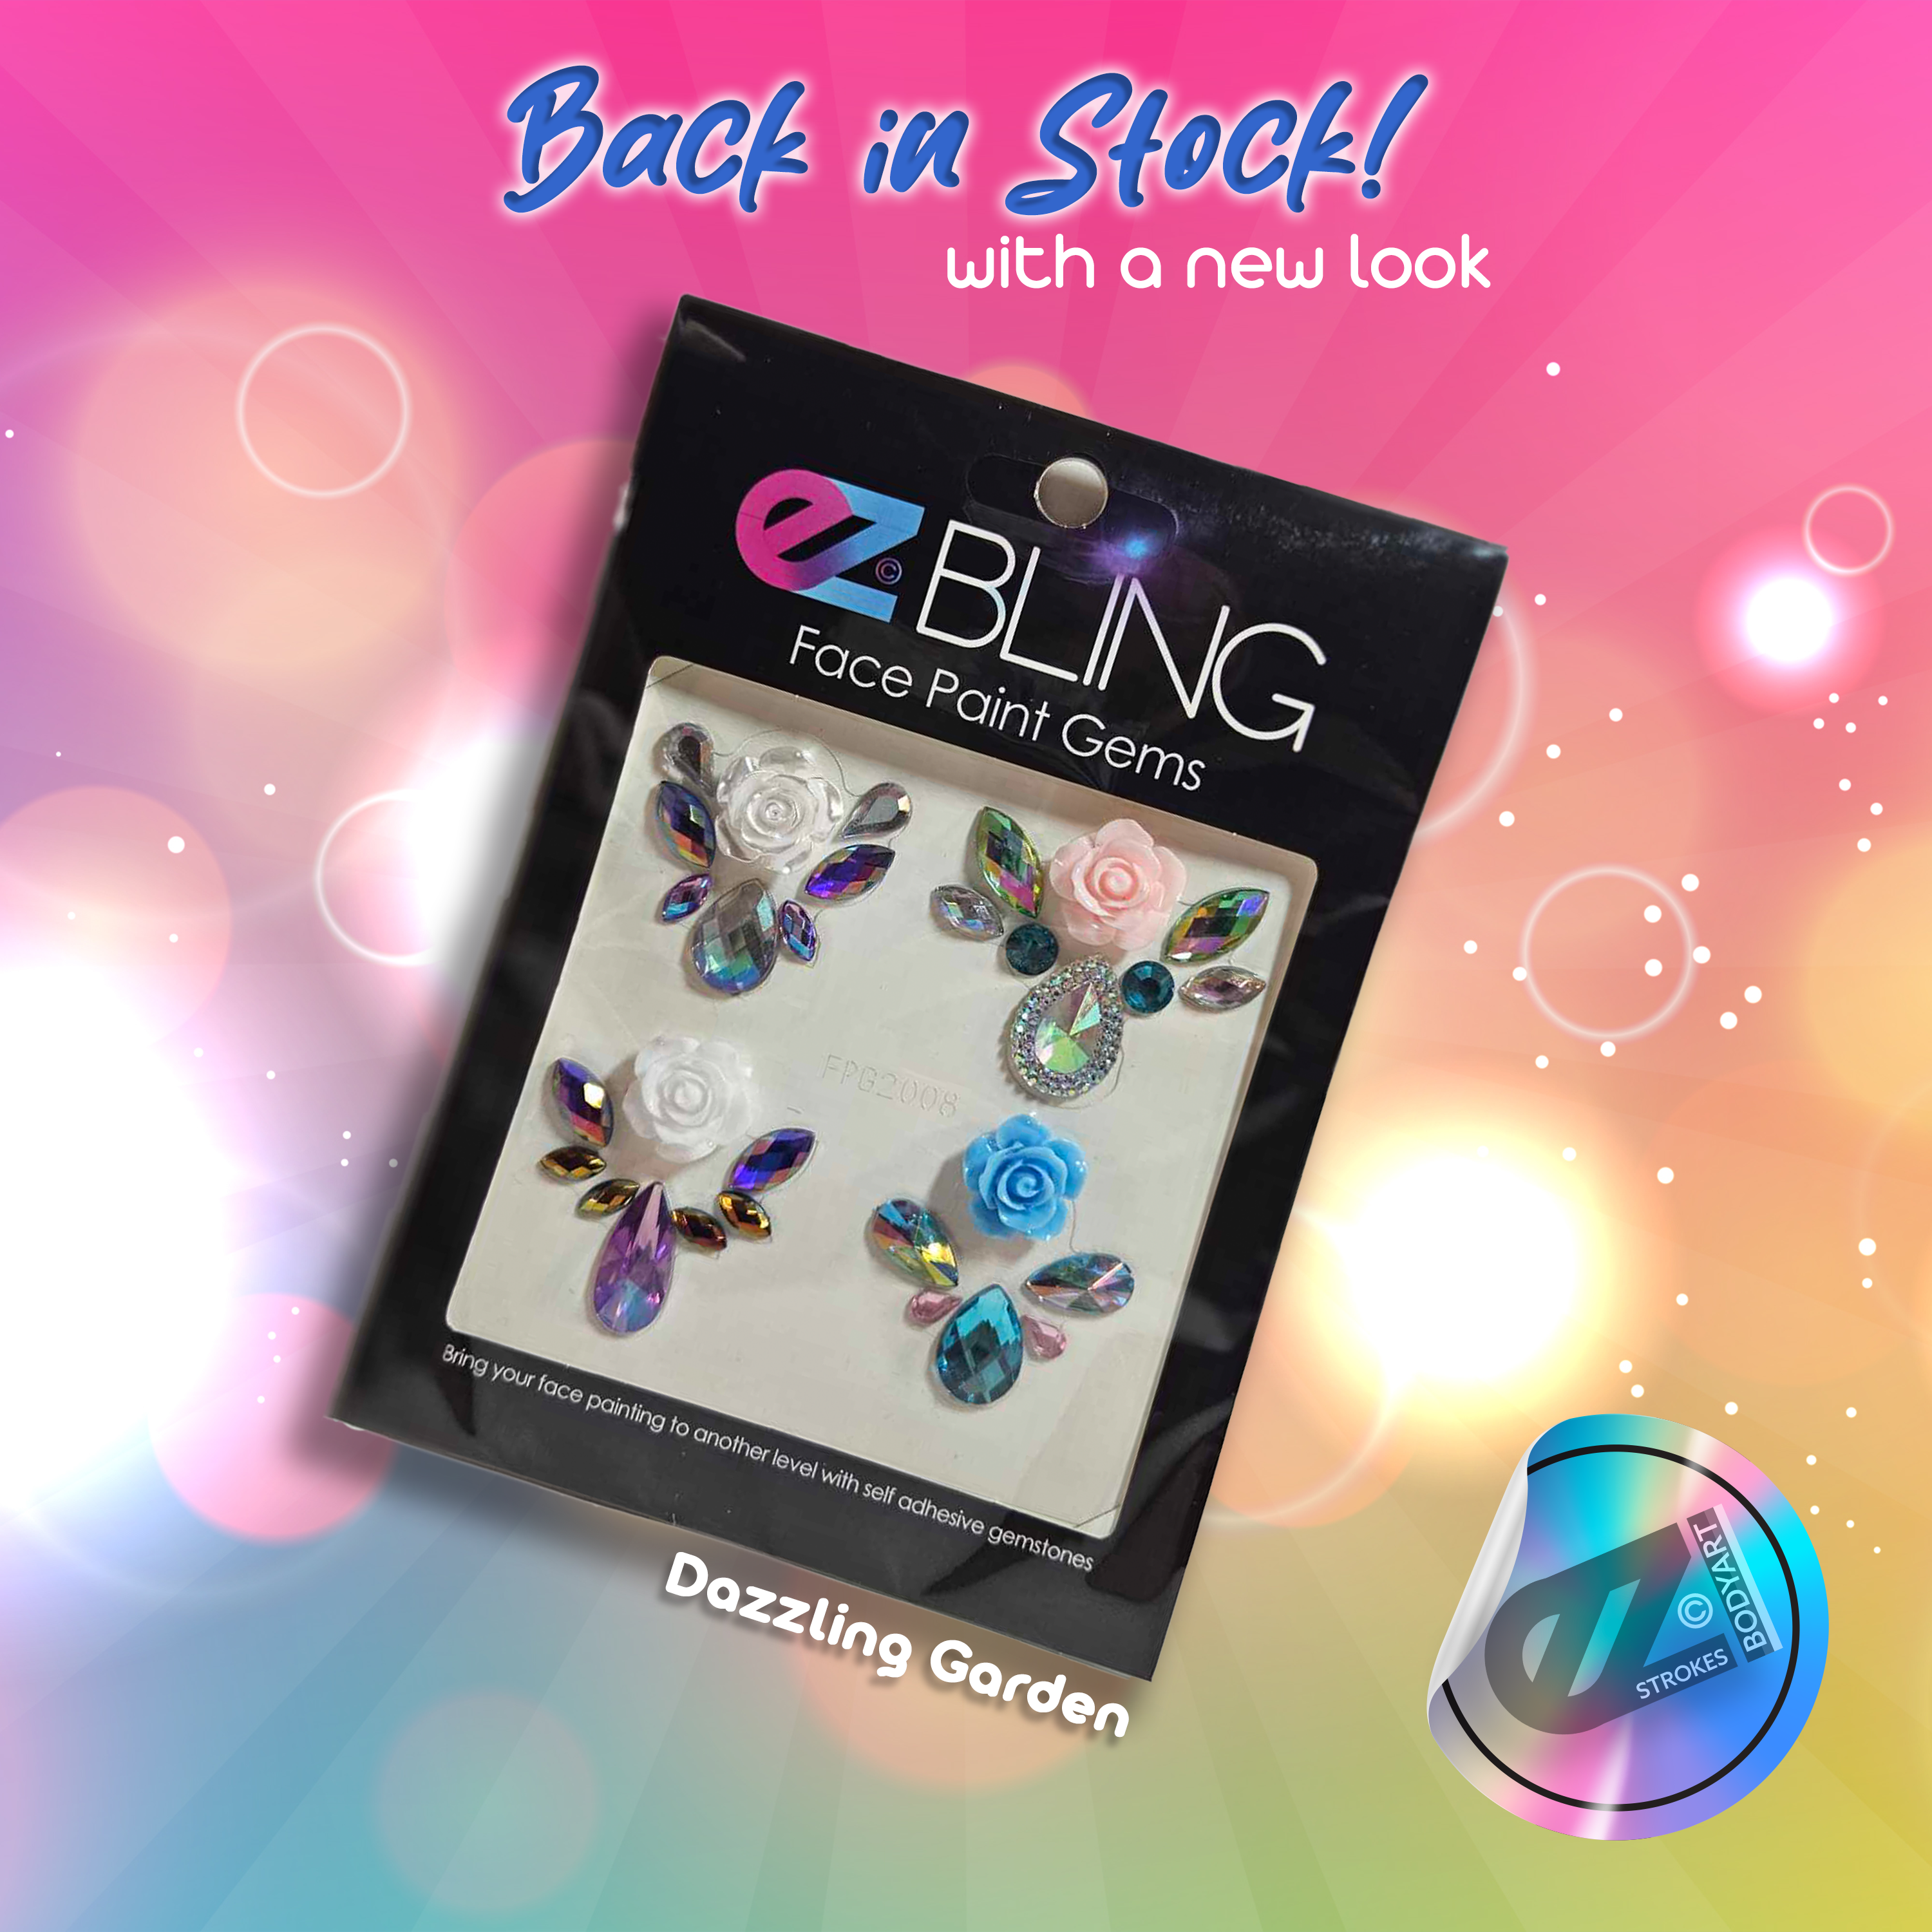 4 Pc. Bling Sets - The Full Collection